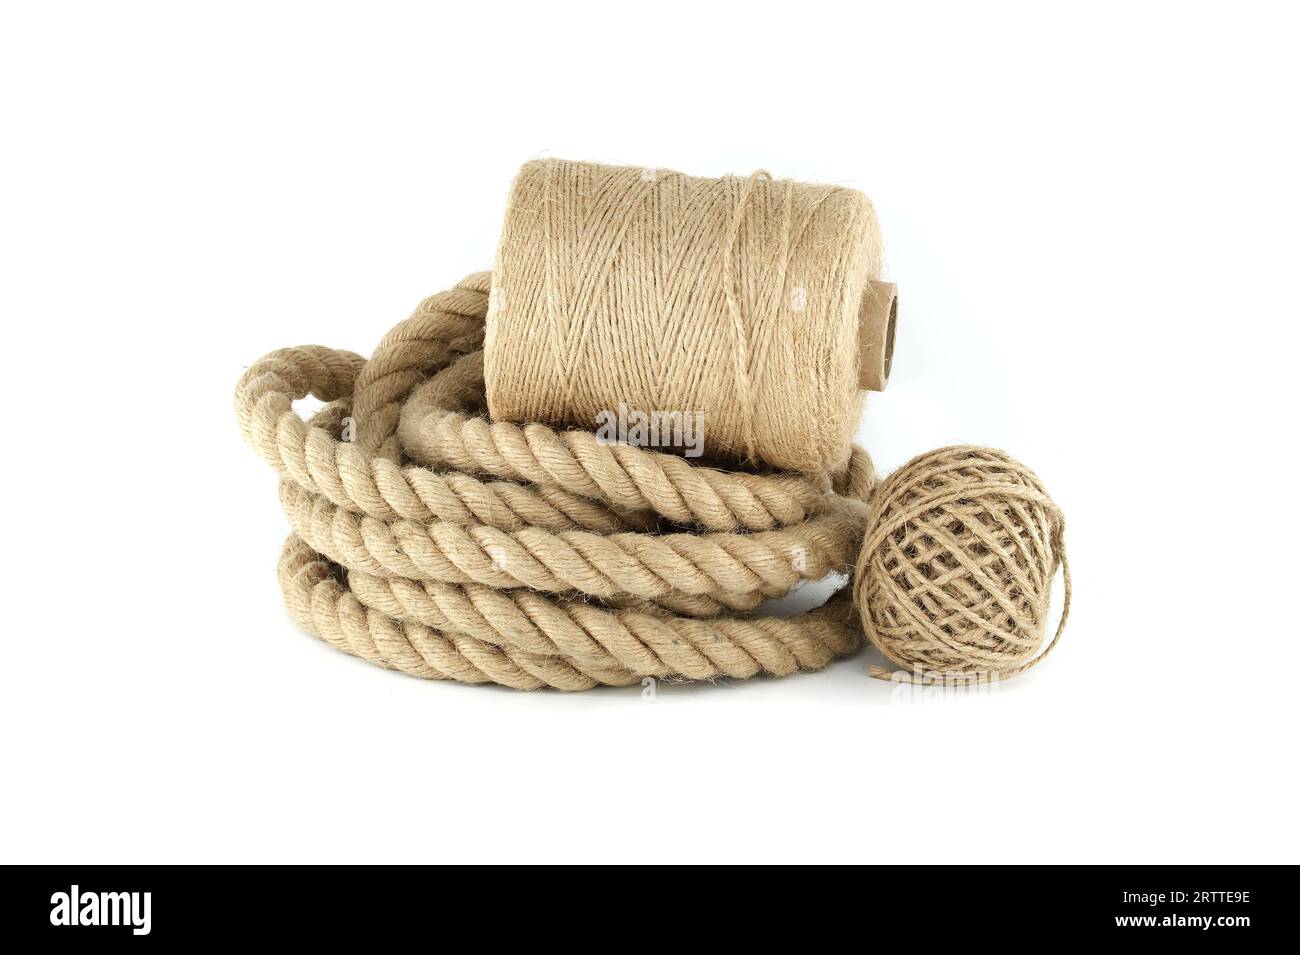 A closeup view of coiled jute rope and brown twisted jute twine